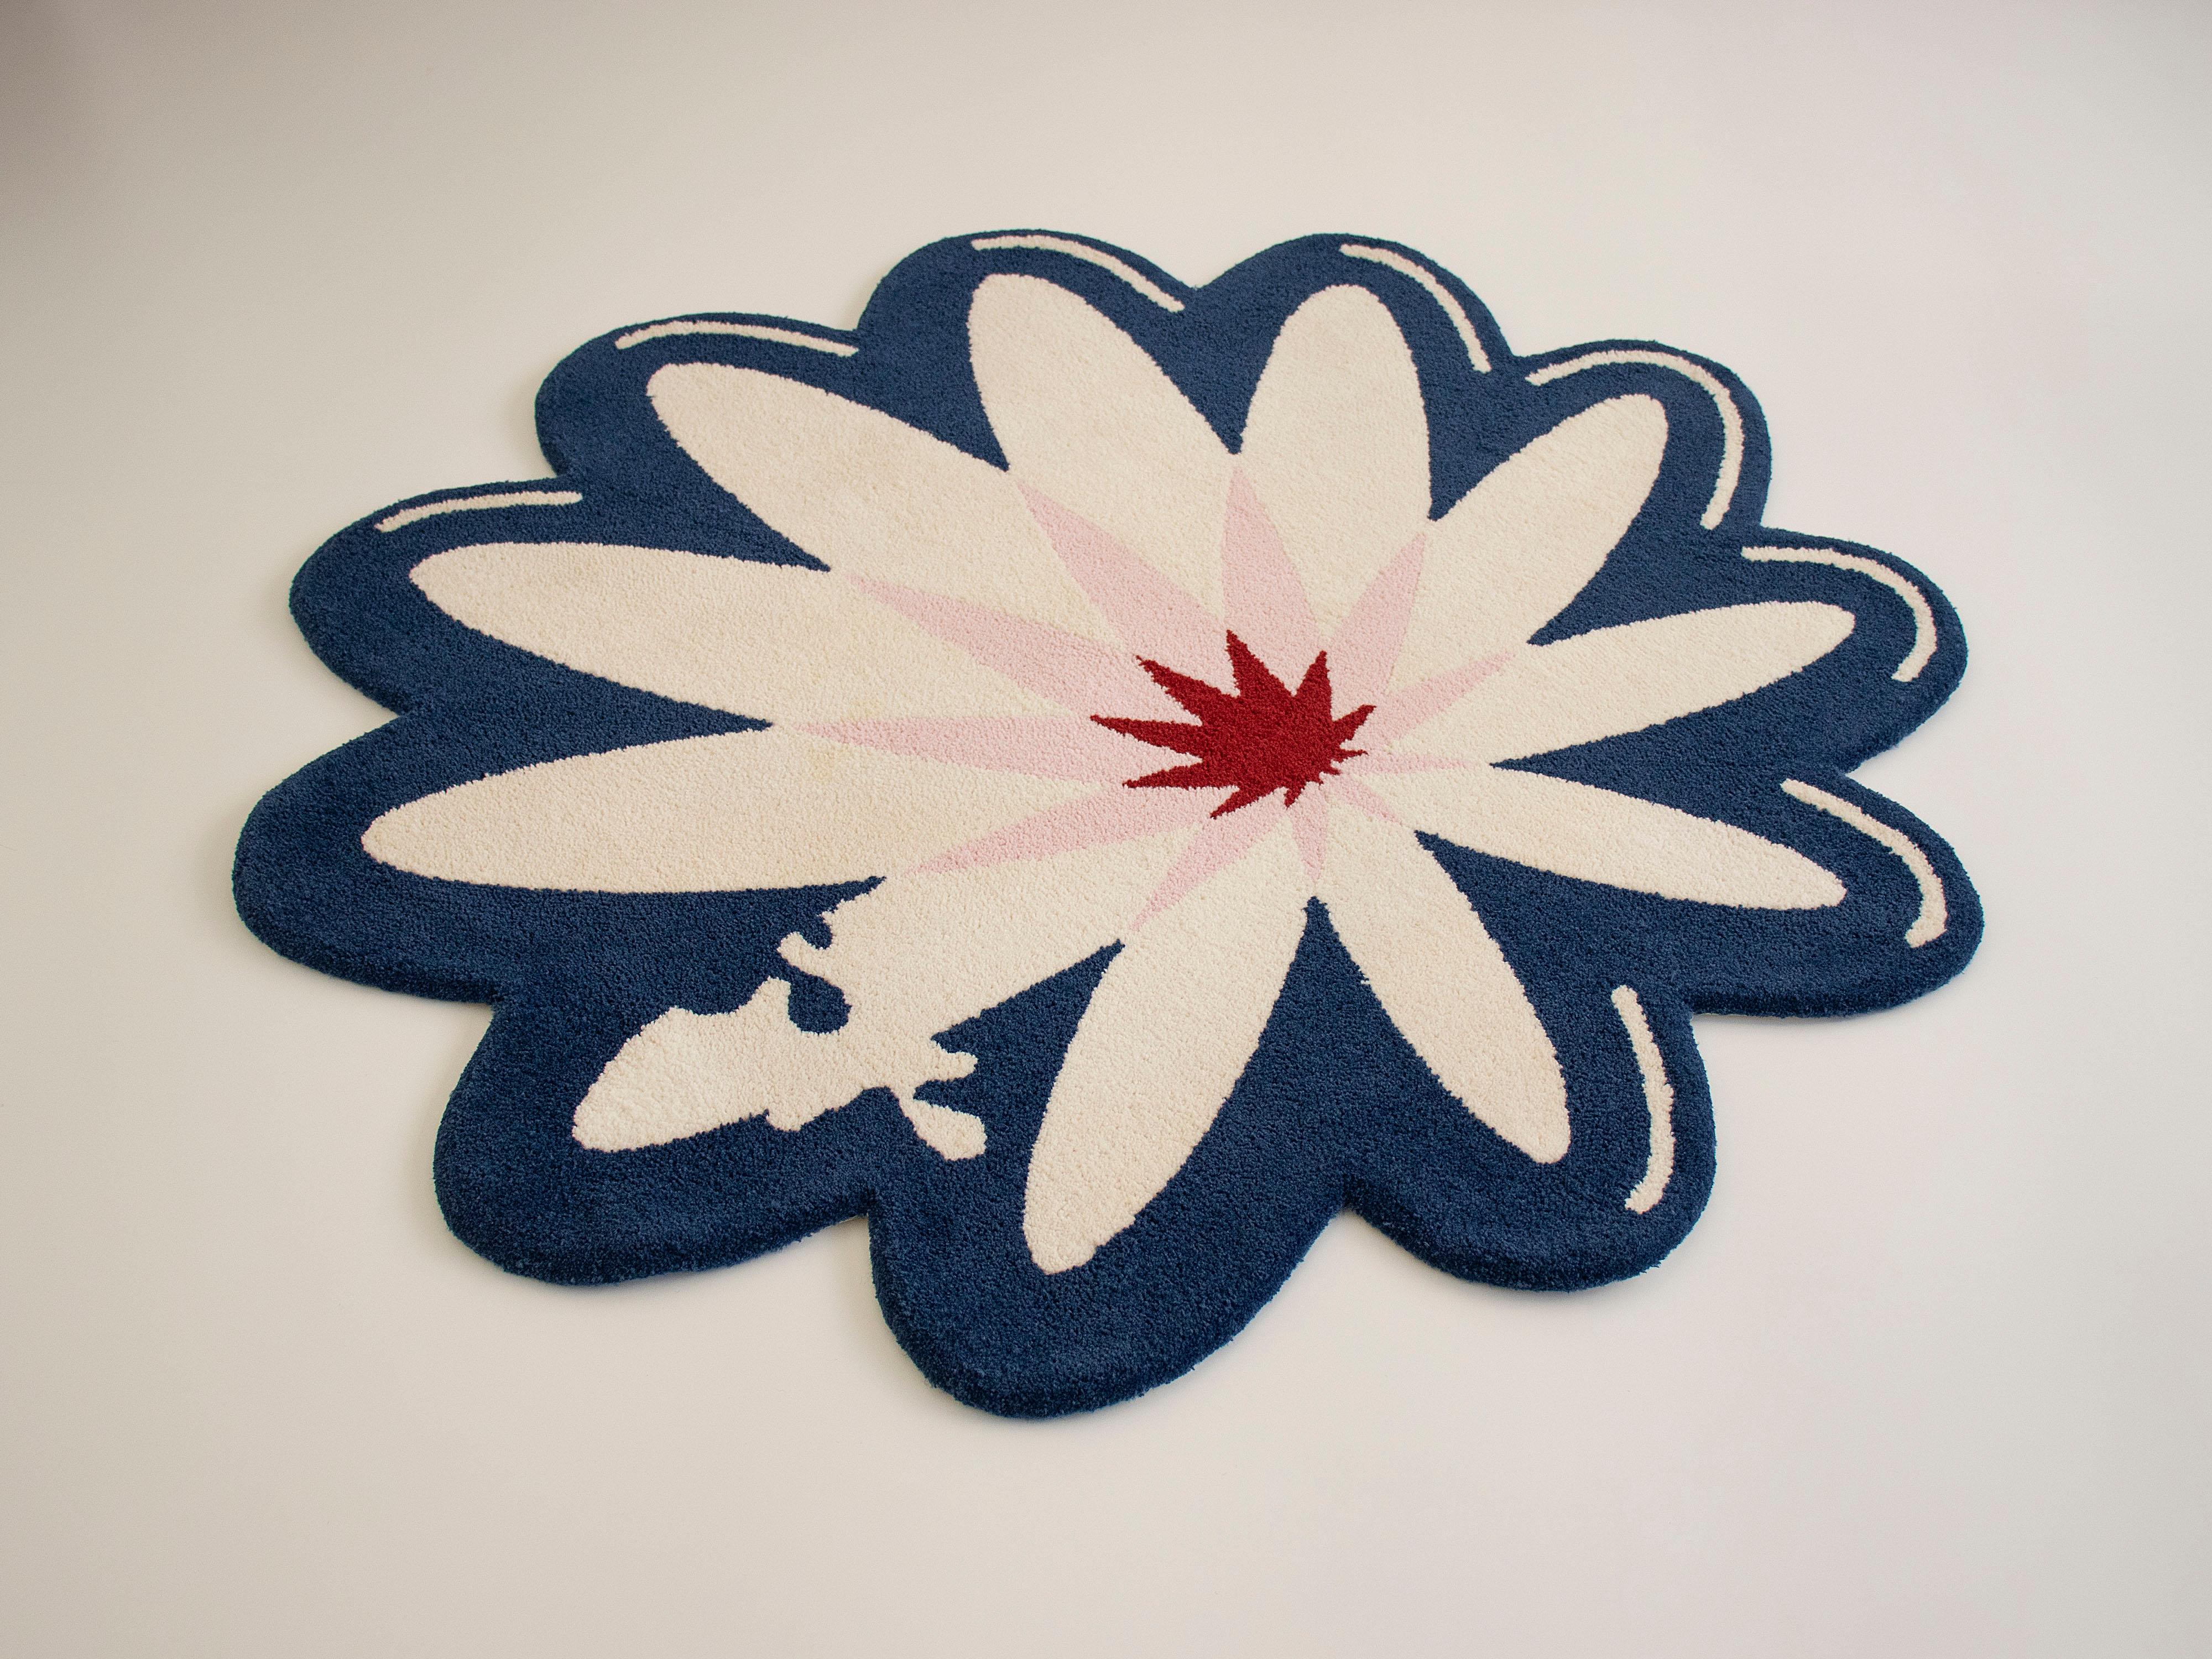 Brazilian Round Blue, White & Red Flower Rug from Graffiti Collection by Paulo Kobylka For Sale